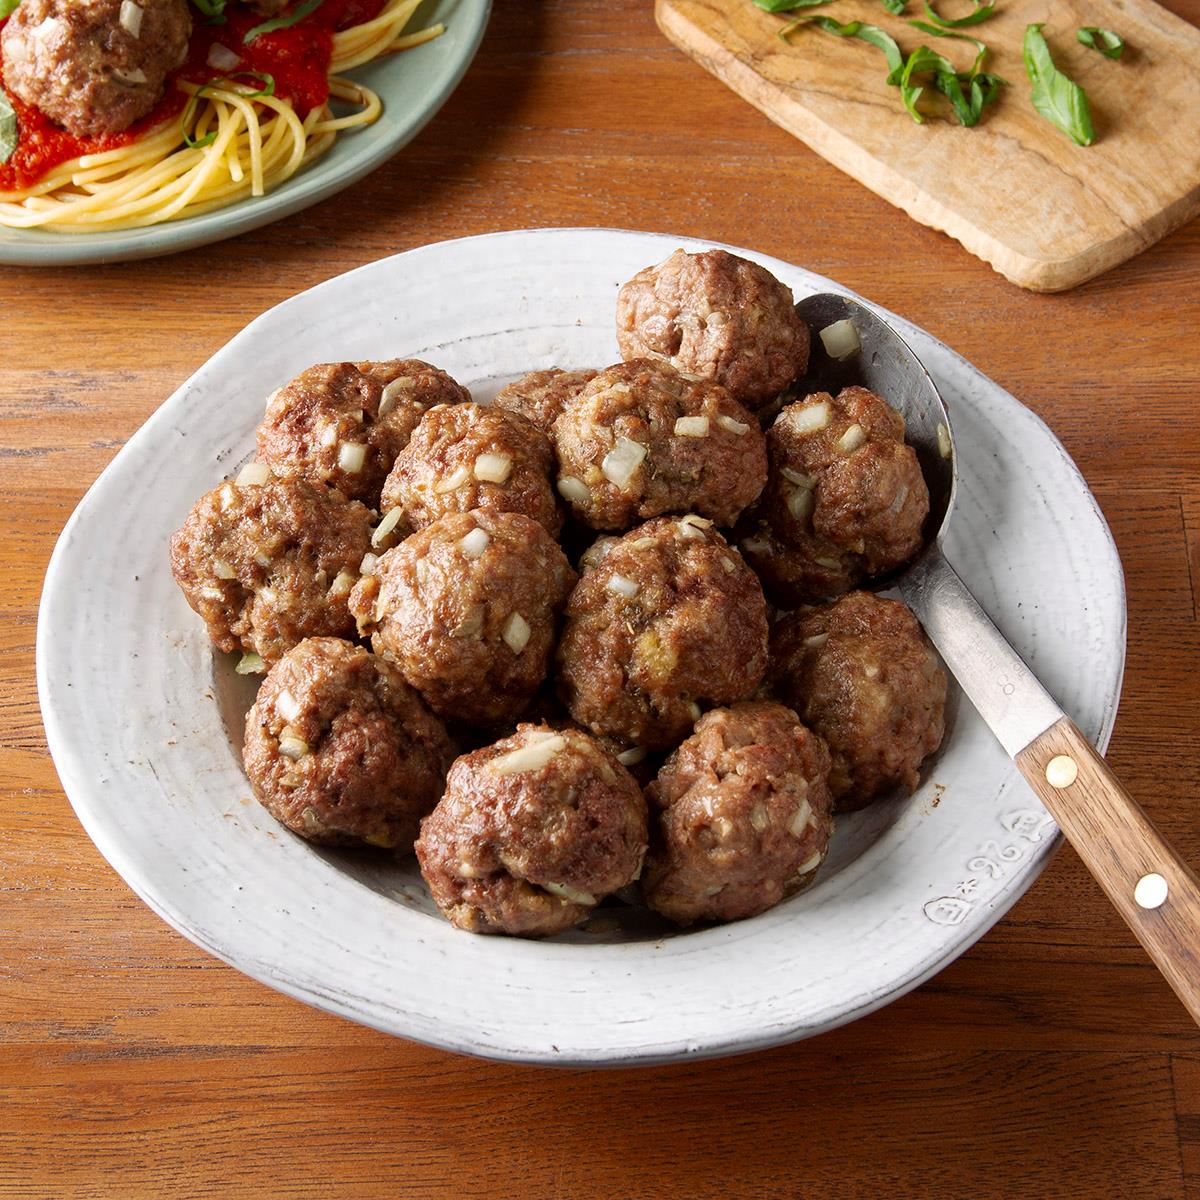 This simple meatball recipe can be used for pizzas, sub sandwiches, in soup...